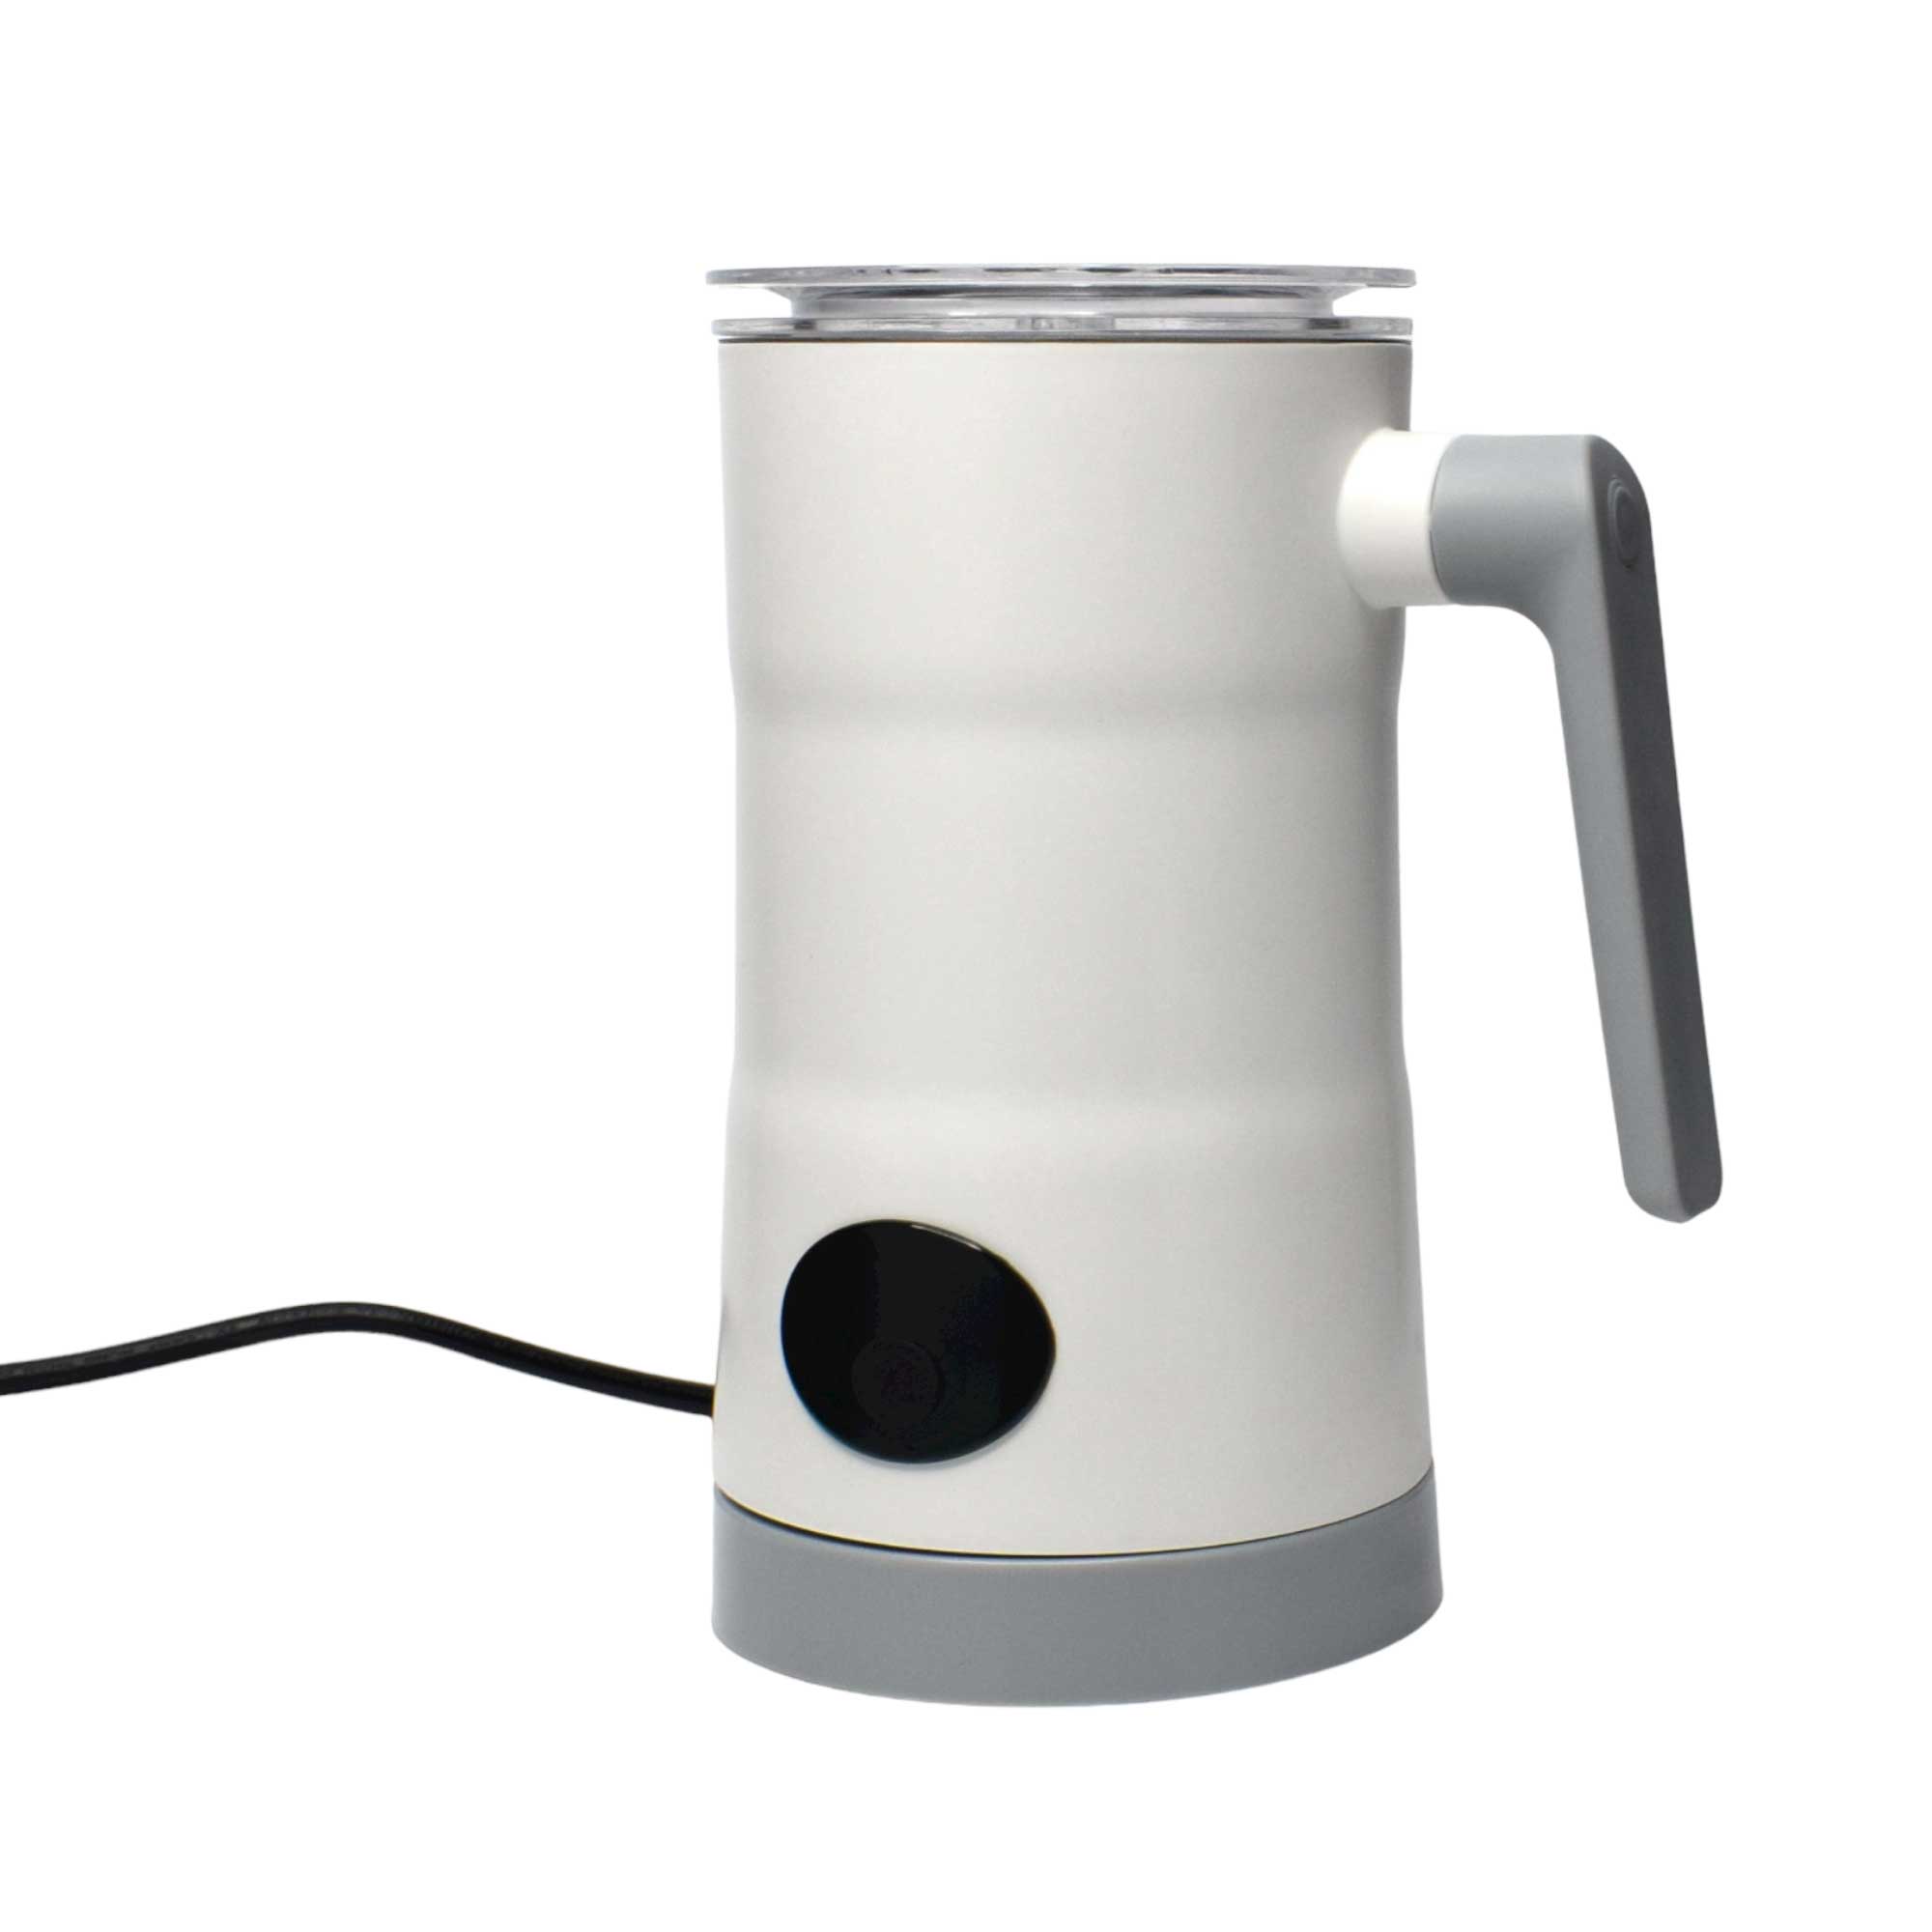 160ml/ 350ml Automatic Electric Milk Frother and Warmer Foamer